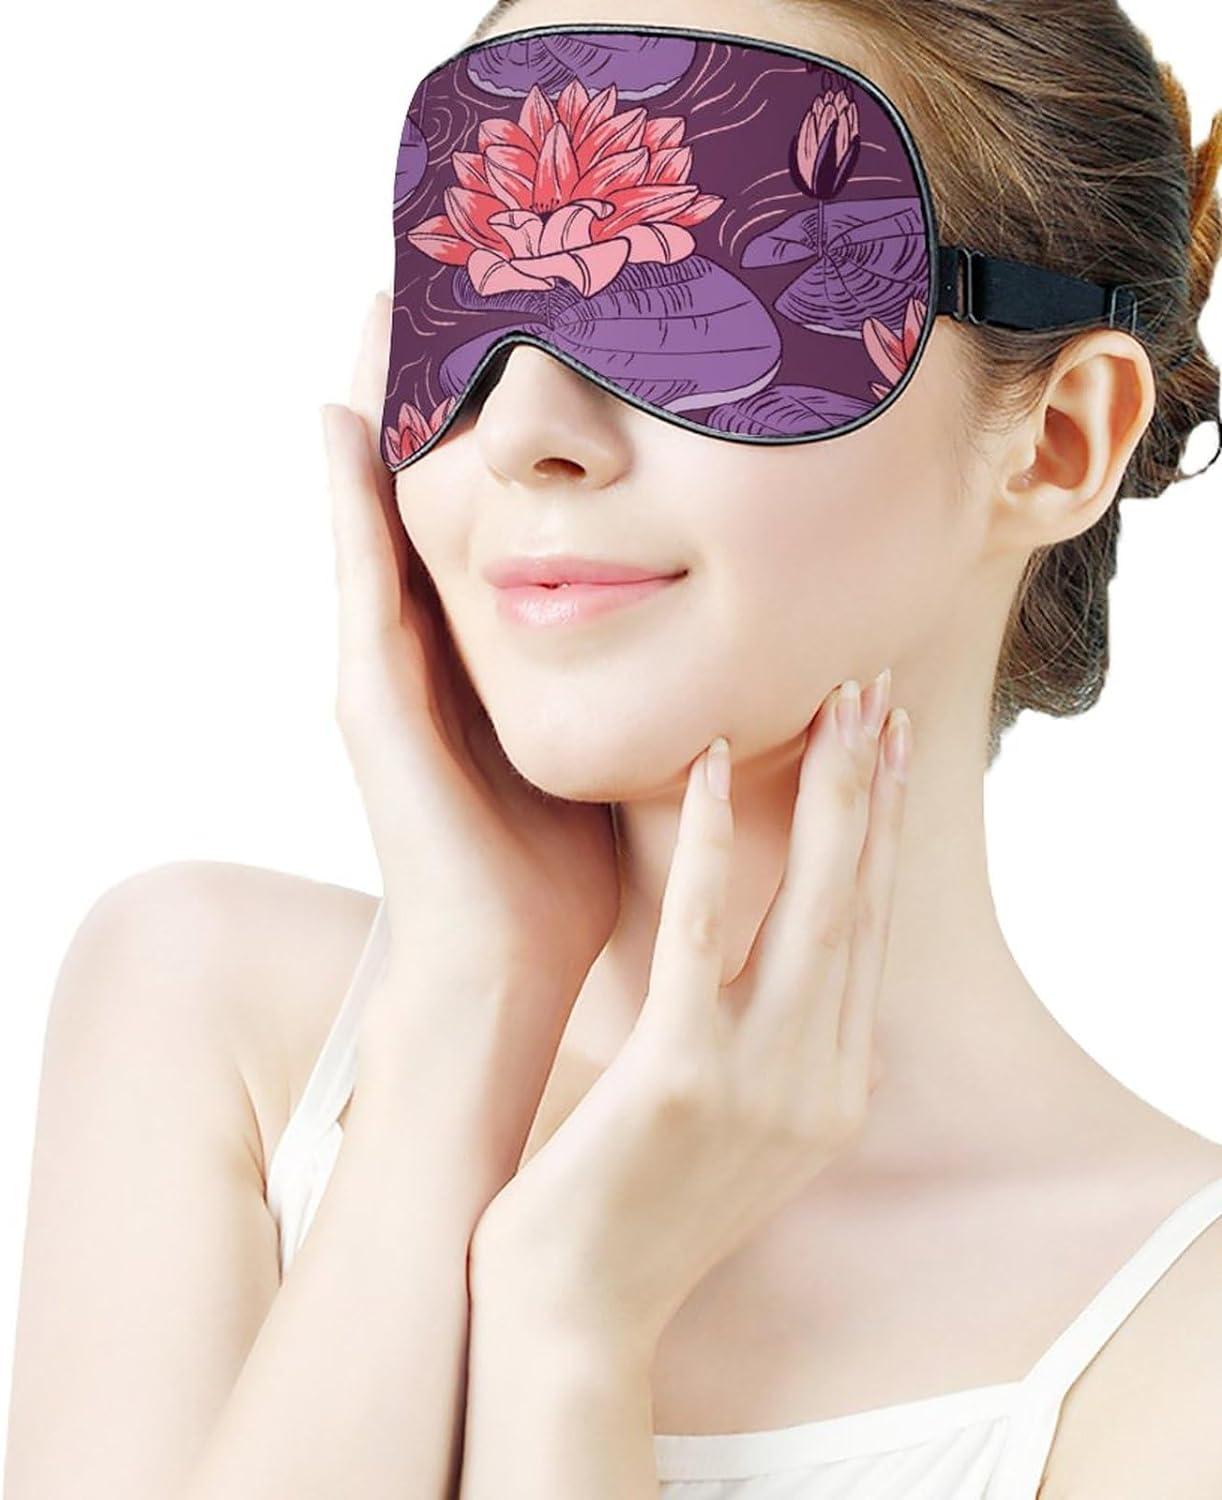 Water Lily and Dragonfly Sleep Mask Eye Cover for Sleeping